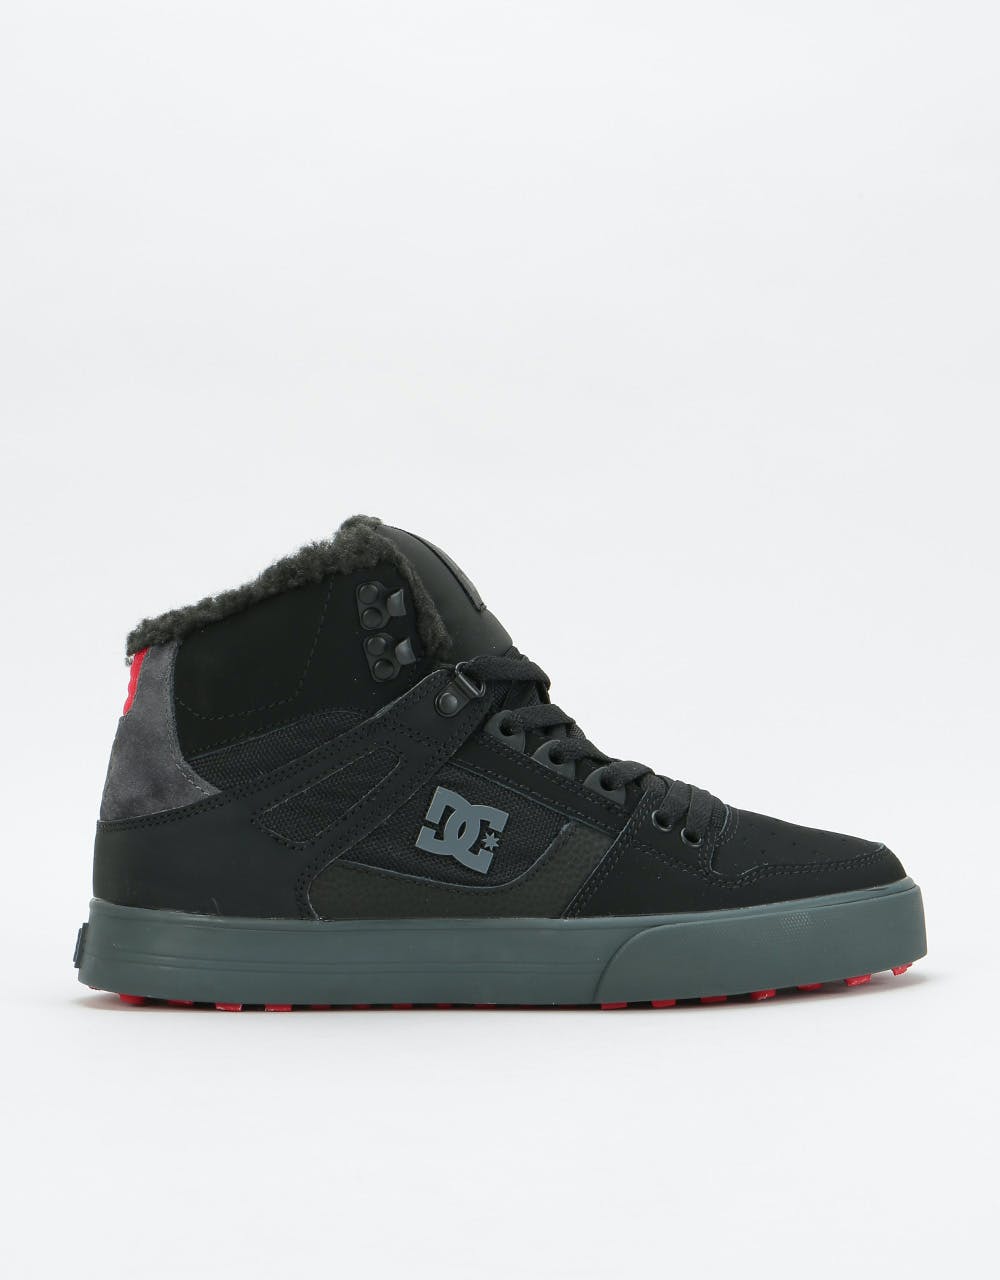 DC Pure High-Top WC WNT Skate Shoes - Black/Grey/Red